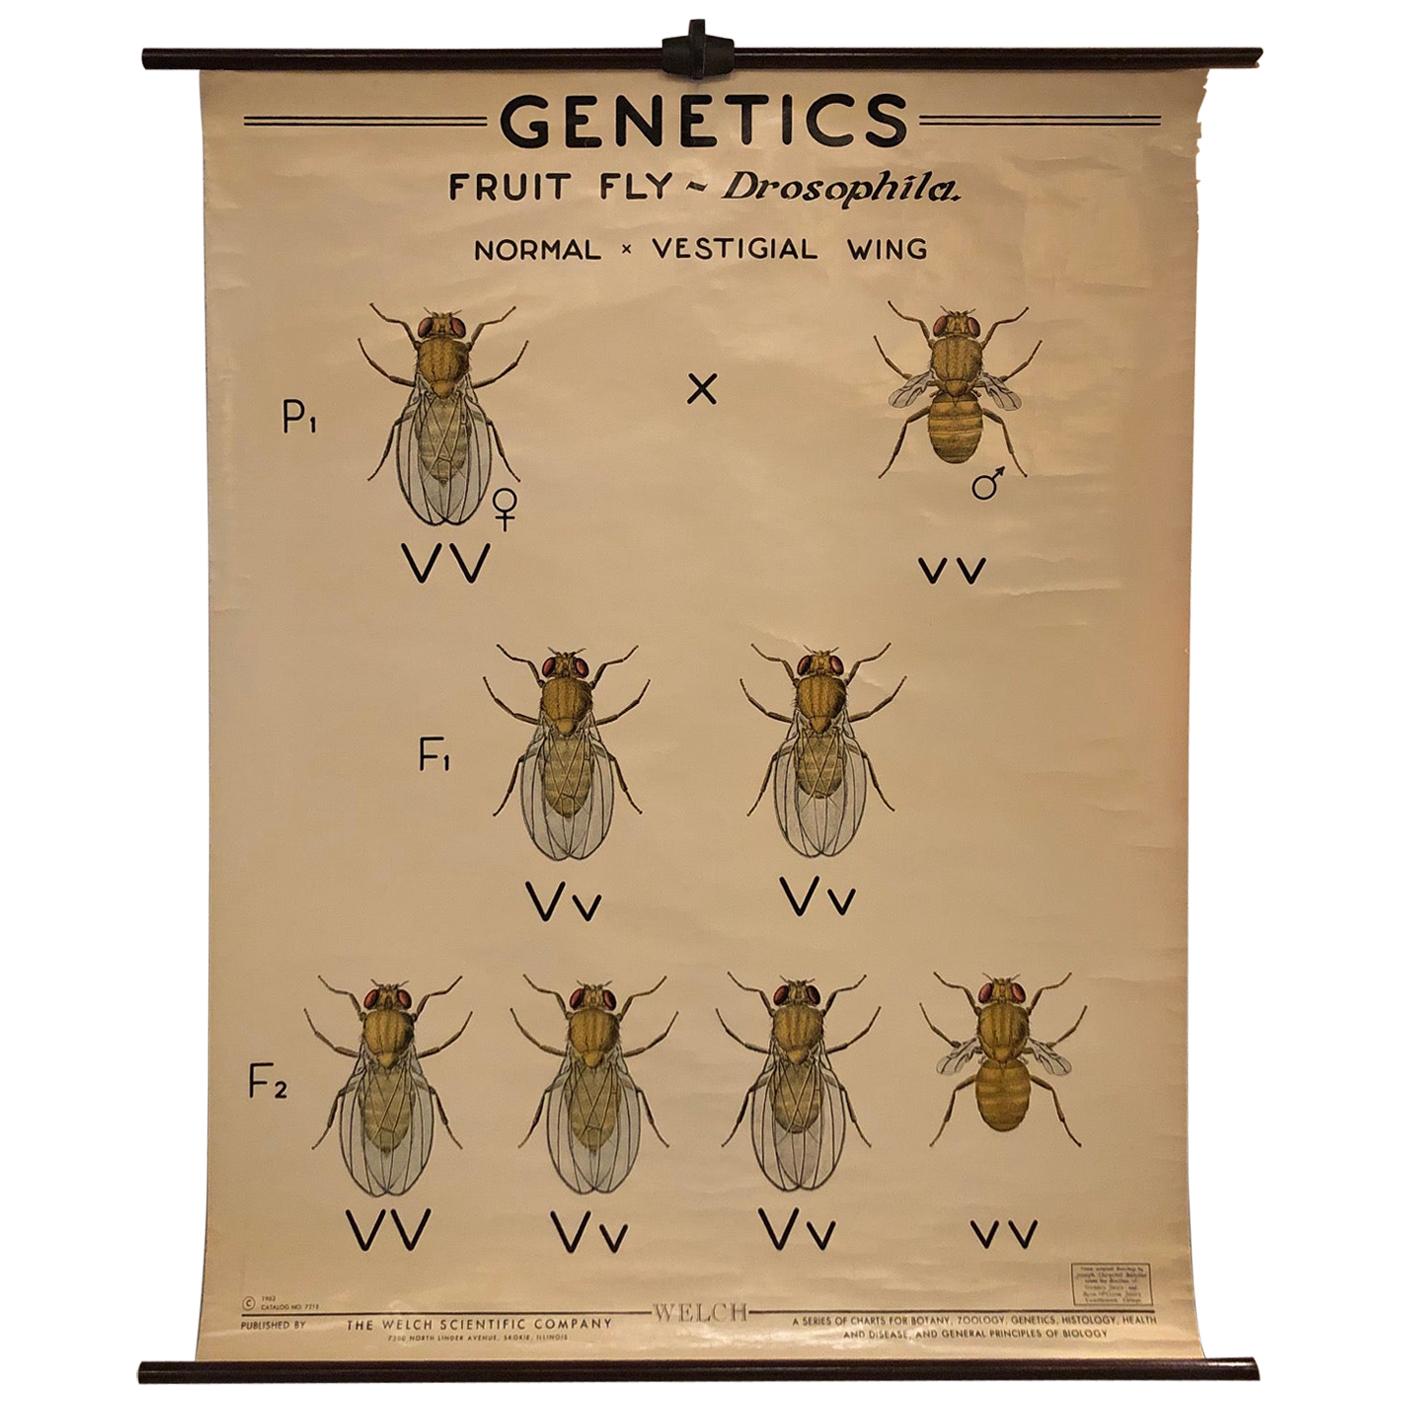 Educational Zoological Fruit Fly Genetics Chart by The Welch Scientific Company